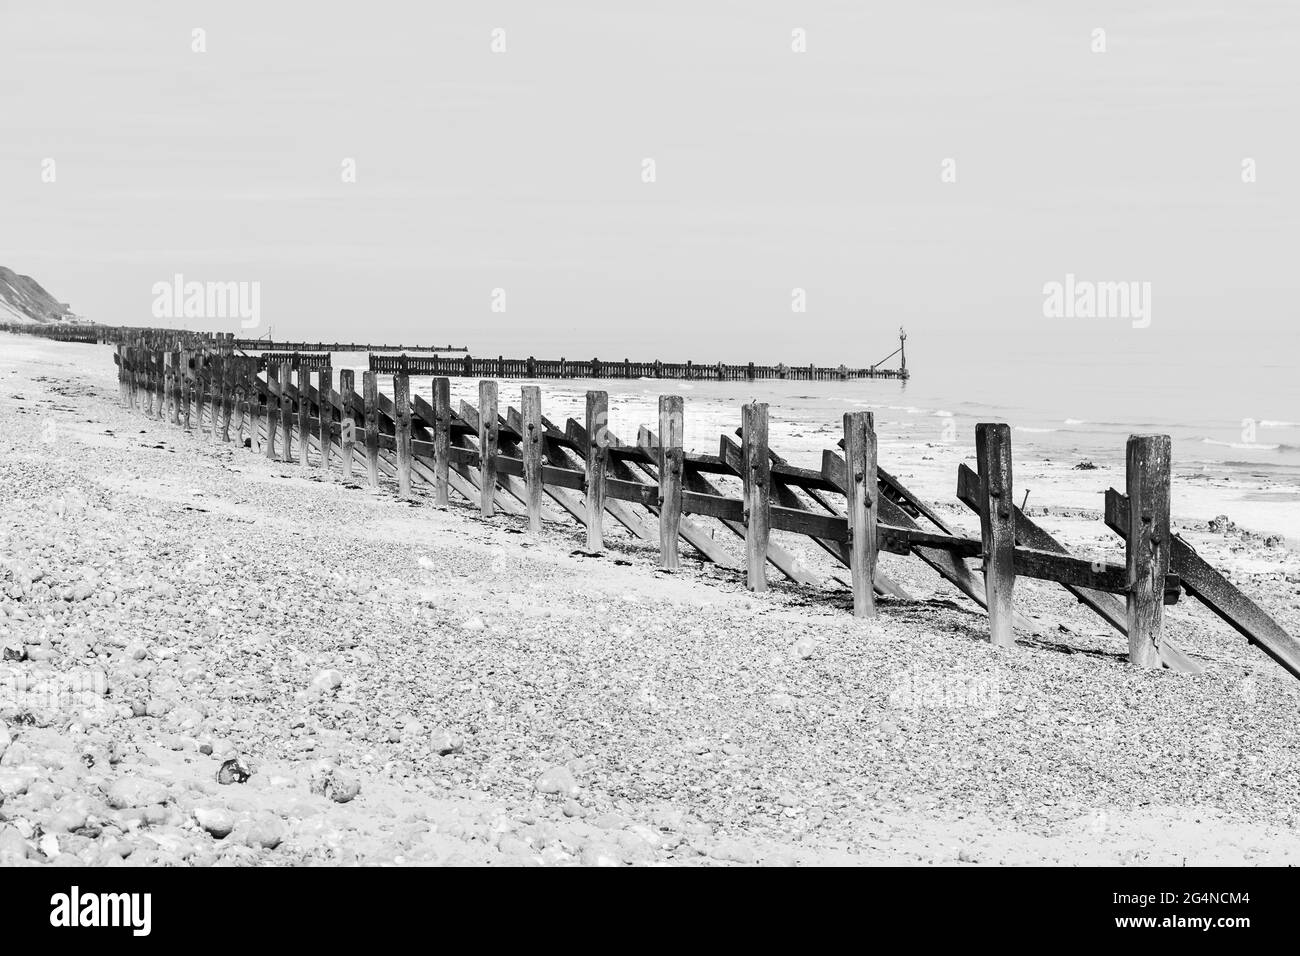 Wooden revetments at West Runton beach in black and white seen on the North Norfolk coast in June 2021. Stock Photo